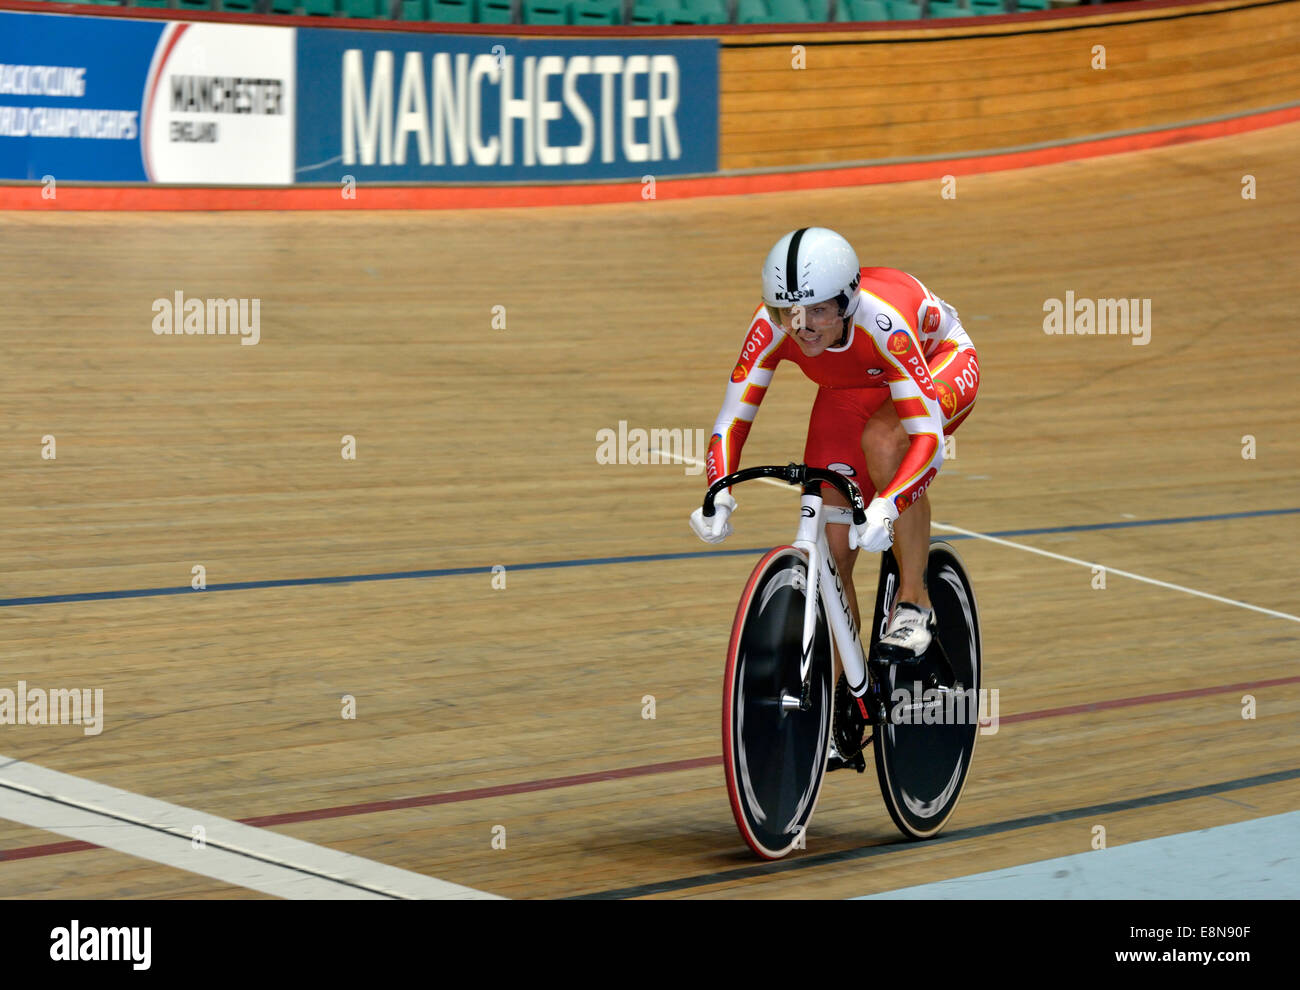 Velodrome  Manchester, UK  11th October 2014 Janni Bormann (Denmark) won the Gold Medal and set a World Best time of 12.310 seconds in the Women's 50+ Sprint at the World Masters Track Championships. She also wins Gold in the Time Trial and the Scratch races. World Masters Cycling Championships  Manchester, UK Credit:  John Fryer/Alamy Live News Stock Photo